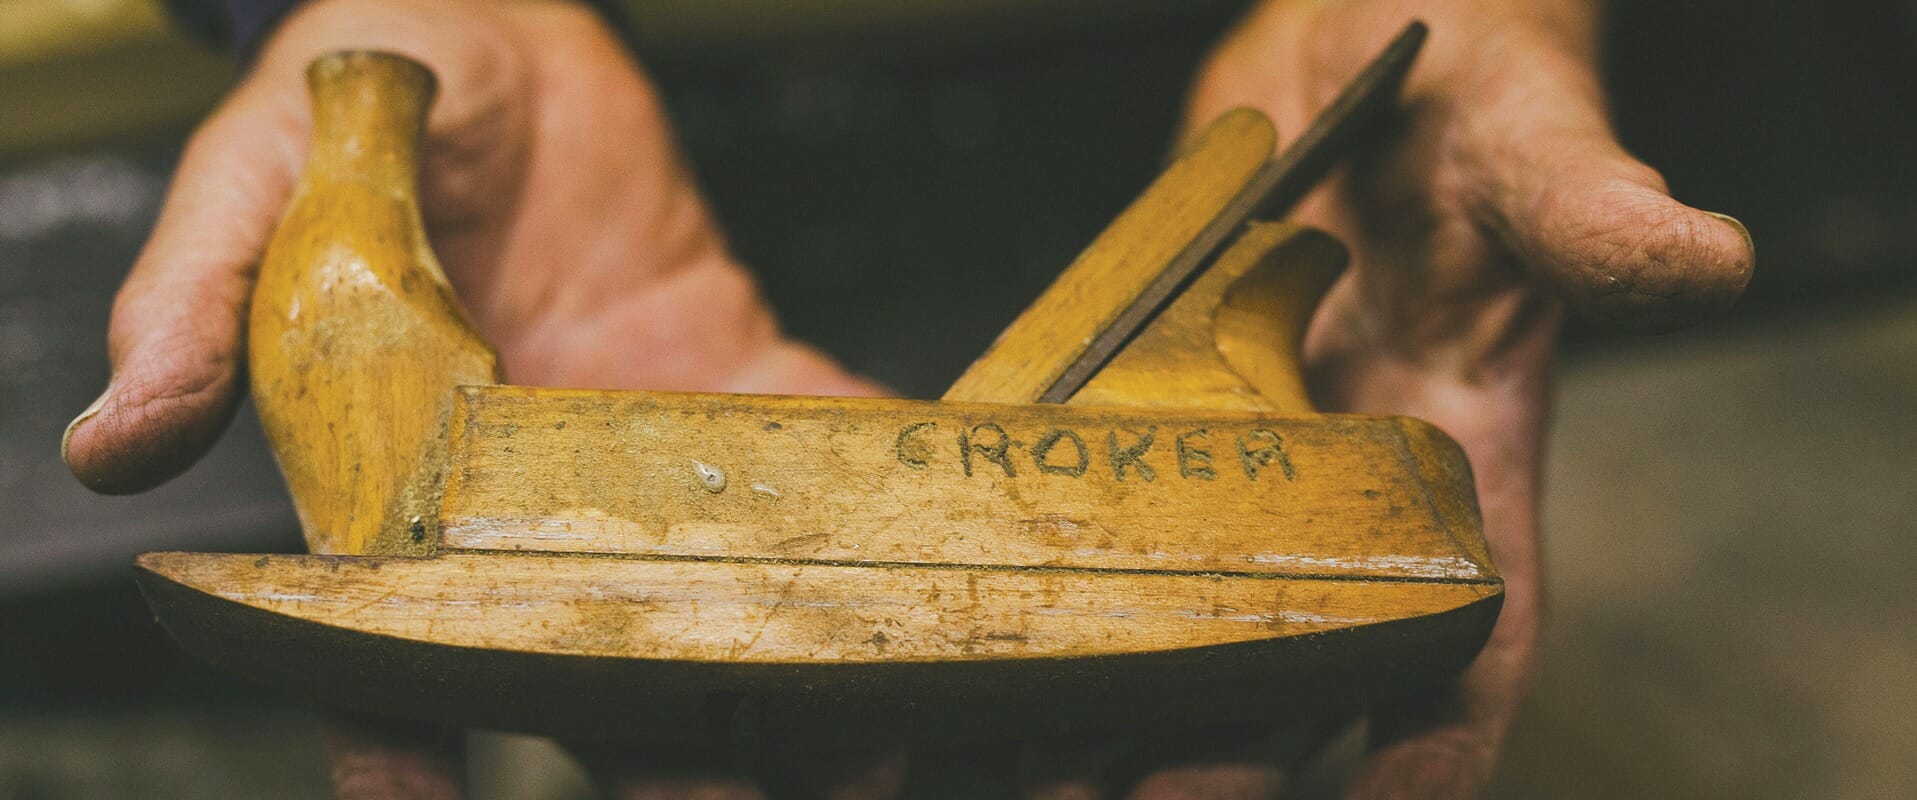 Croker Oars – from Manning Valley to the world